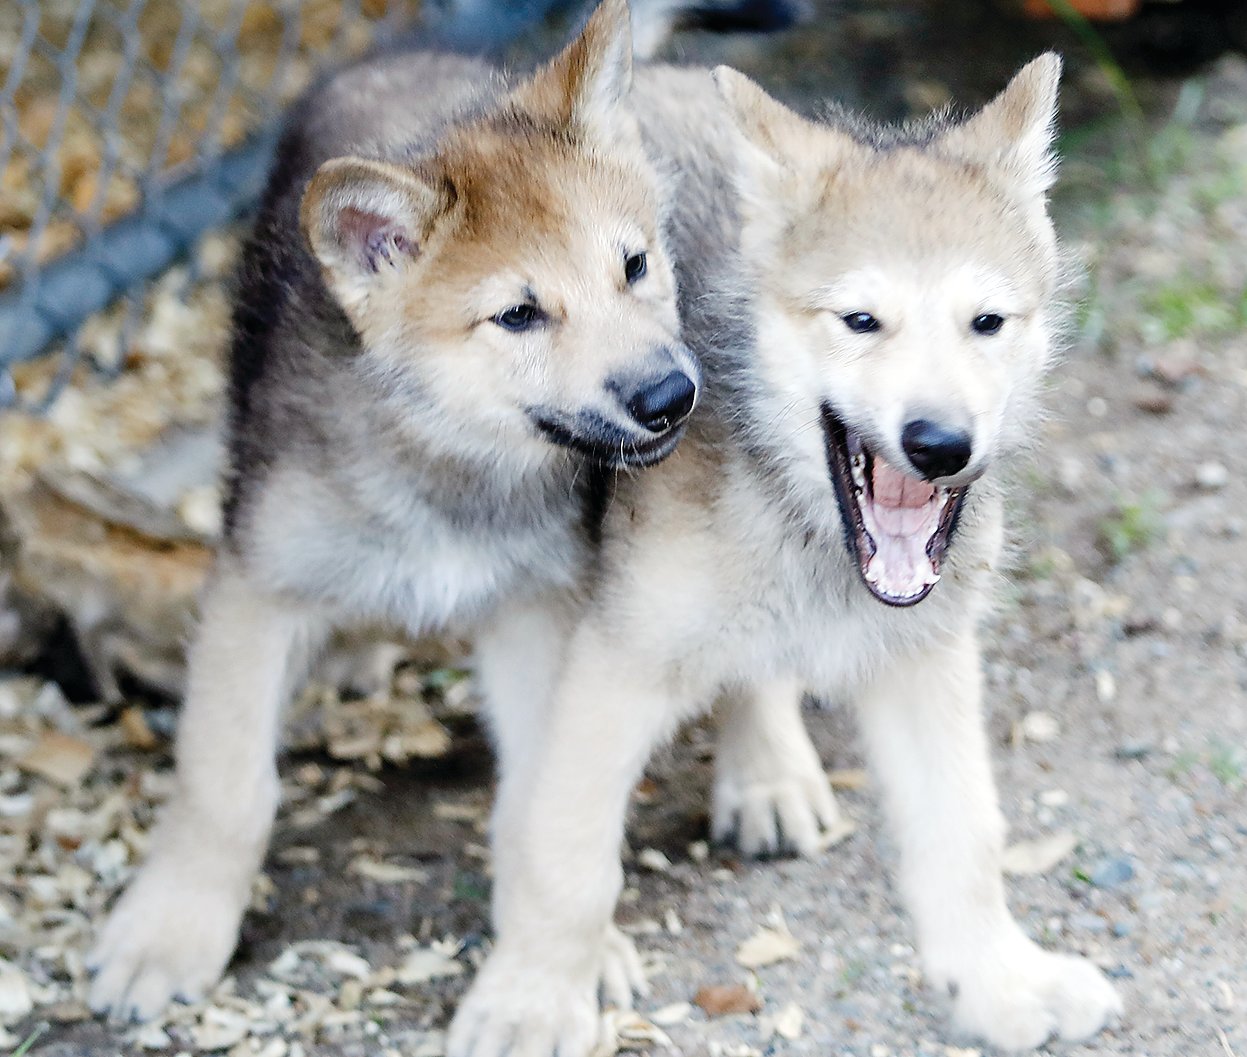 Newly- named wolf pups 
Blackstone and Caz were playful during a recent 
public 
showing of the new 
members 
of the wolf center’s 
ambassador pack.